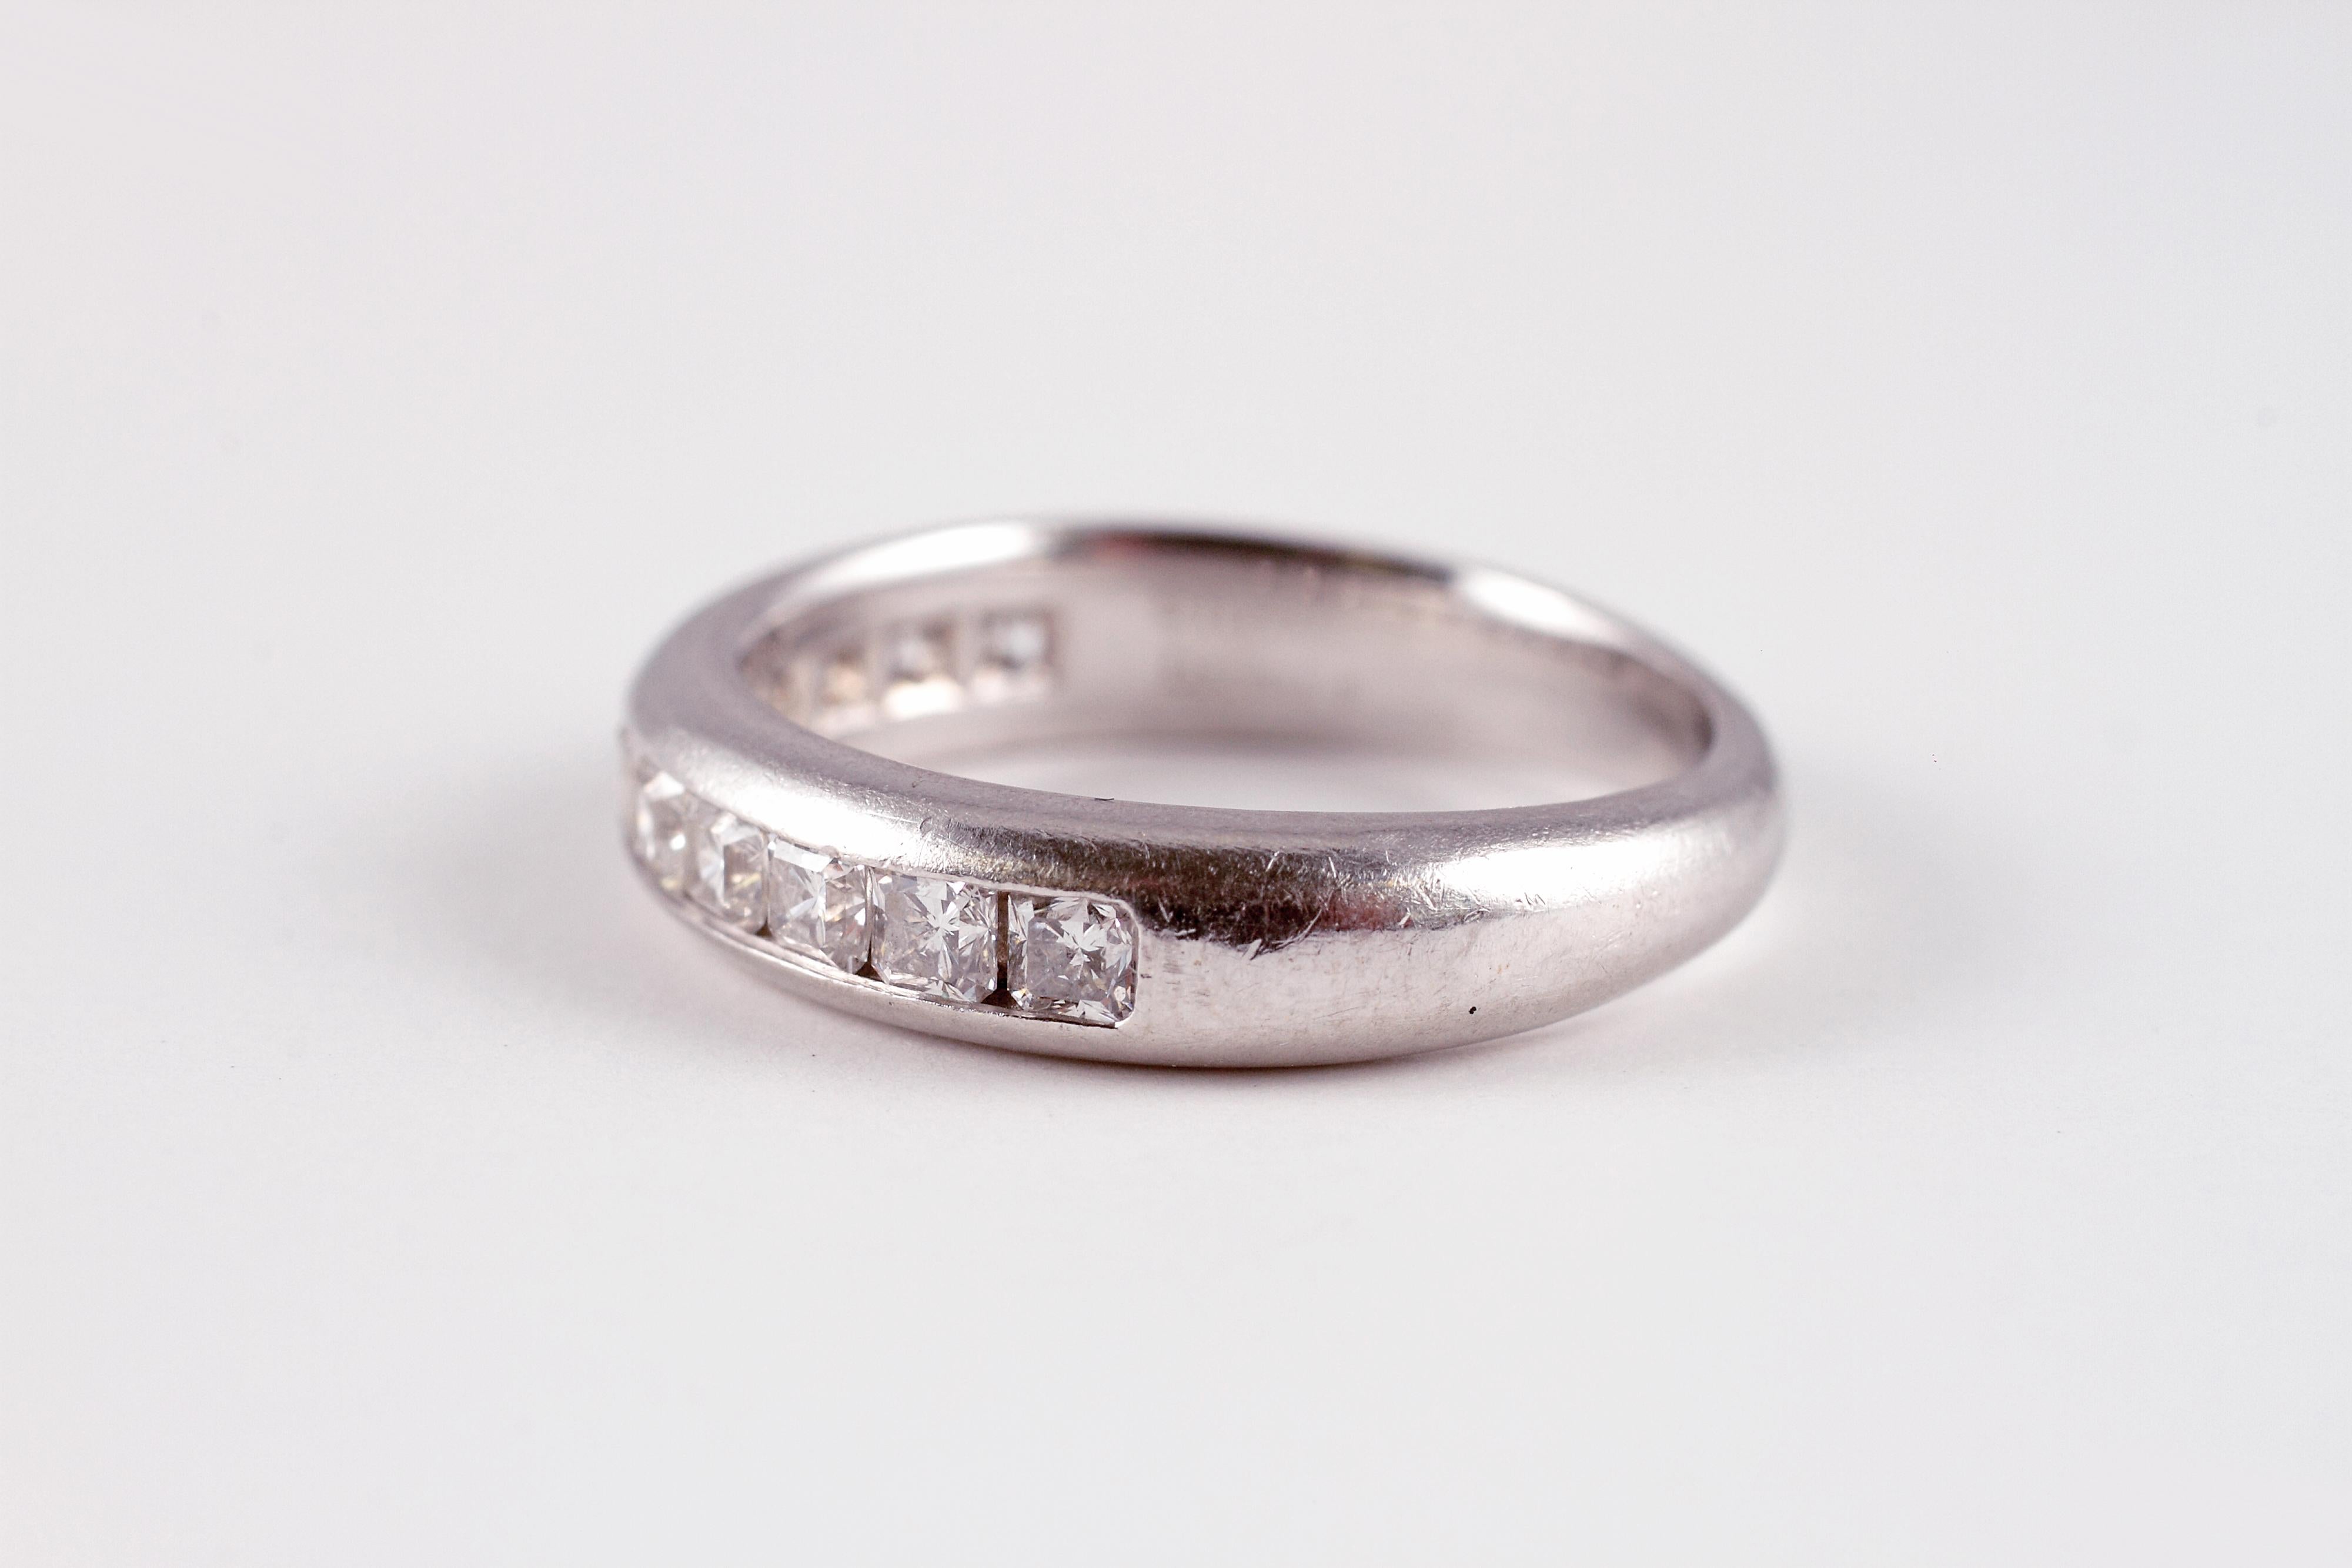 This 4.00 mm, platinum half circle ring supports eleven channel-set, 